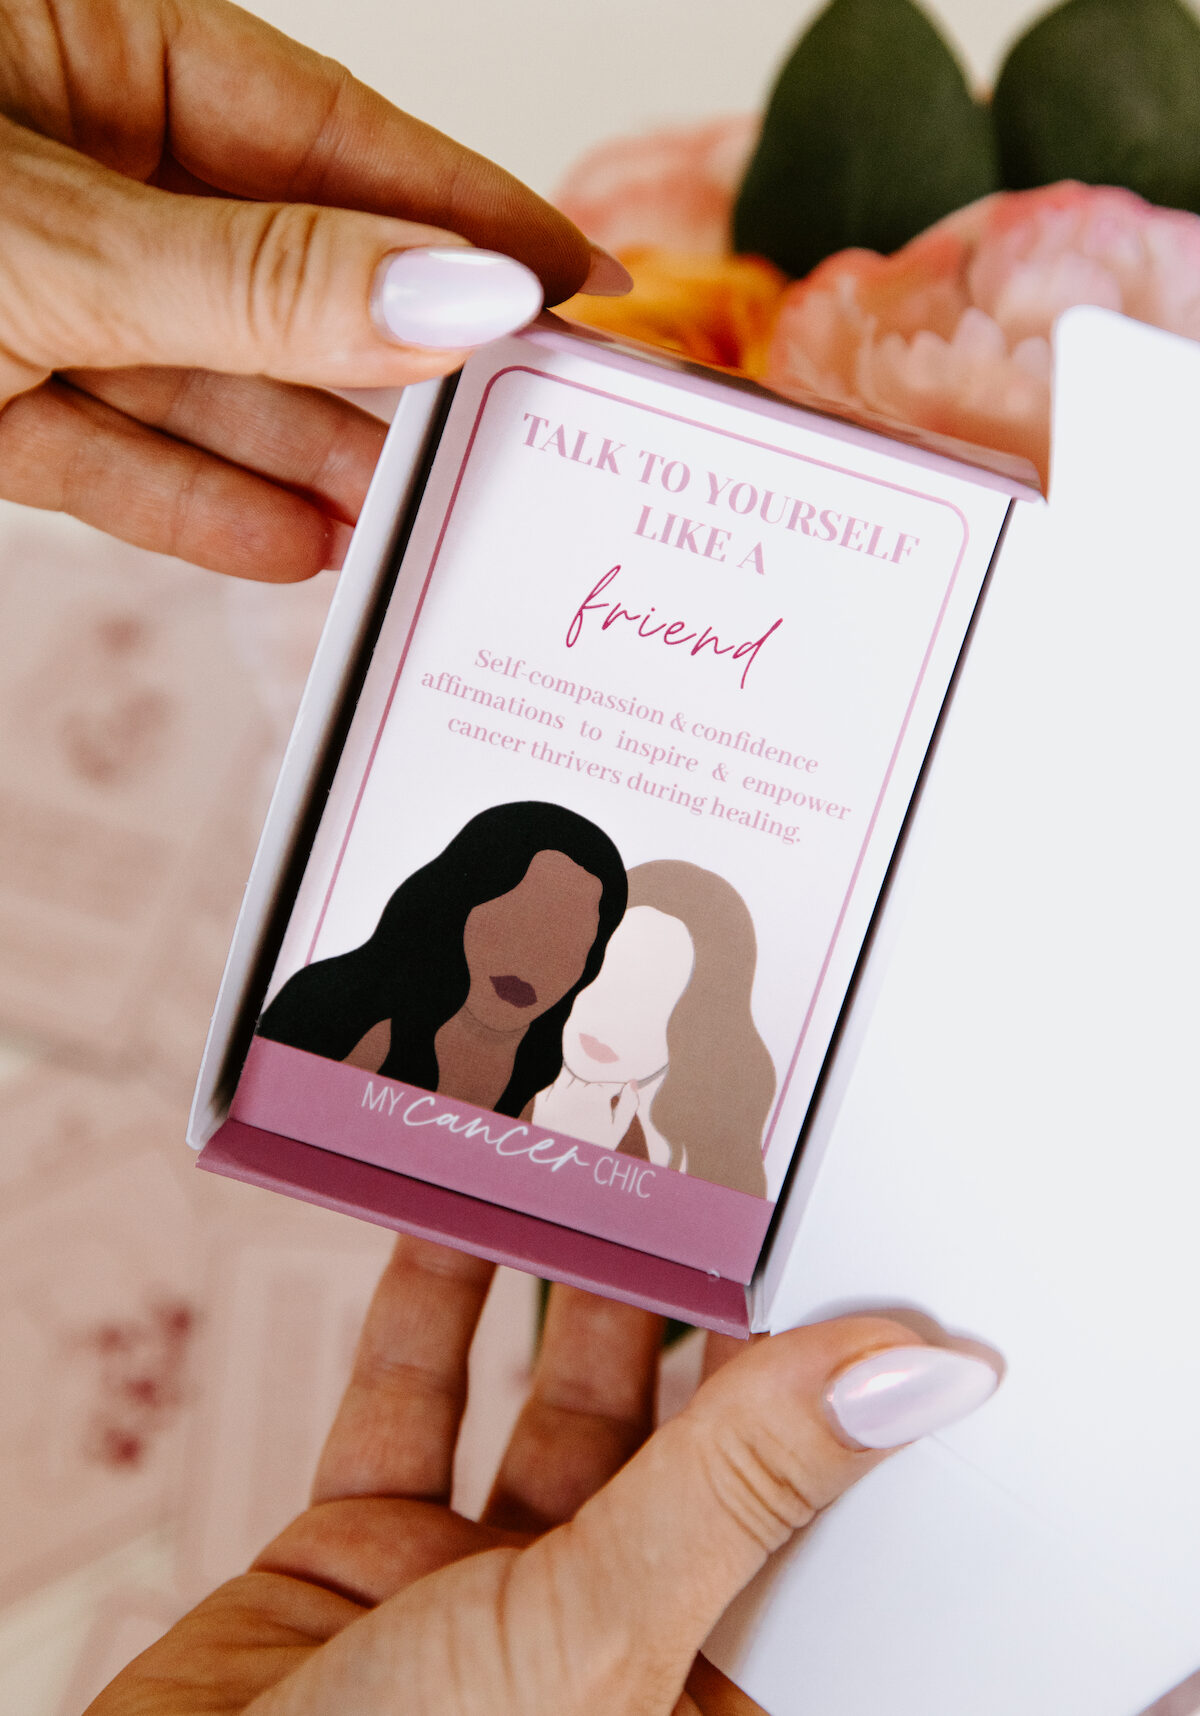 talk to yourself like a friend affirmation card two woman illustration